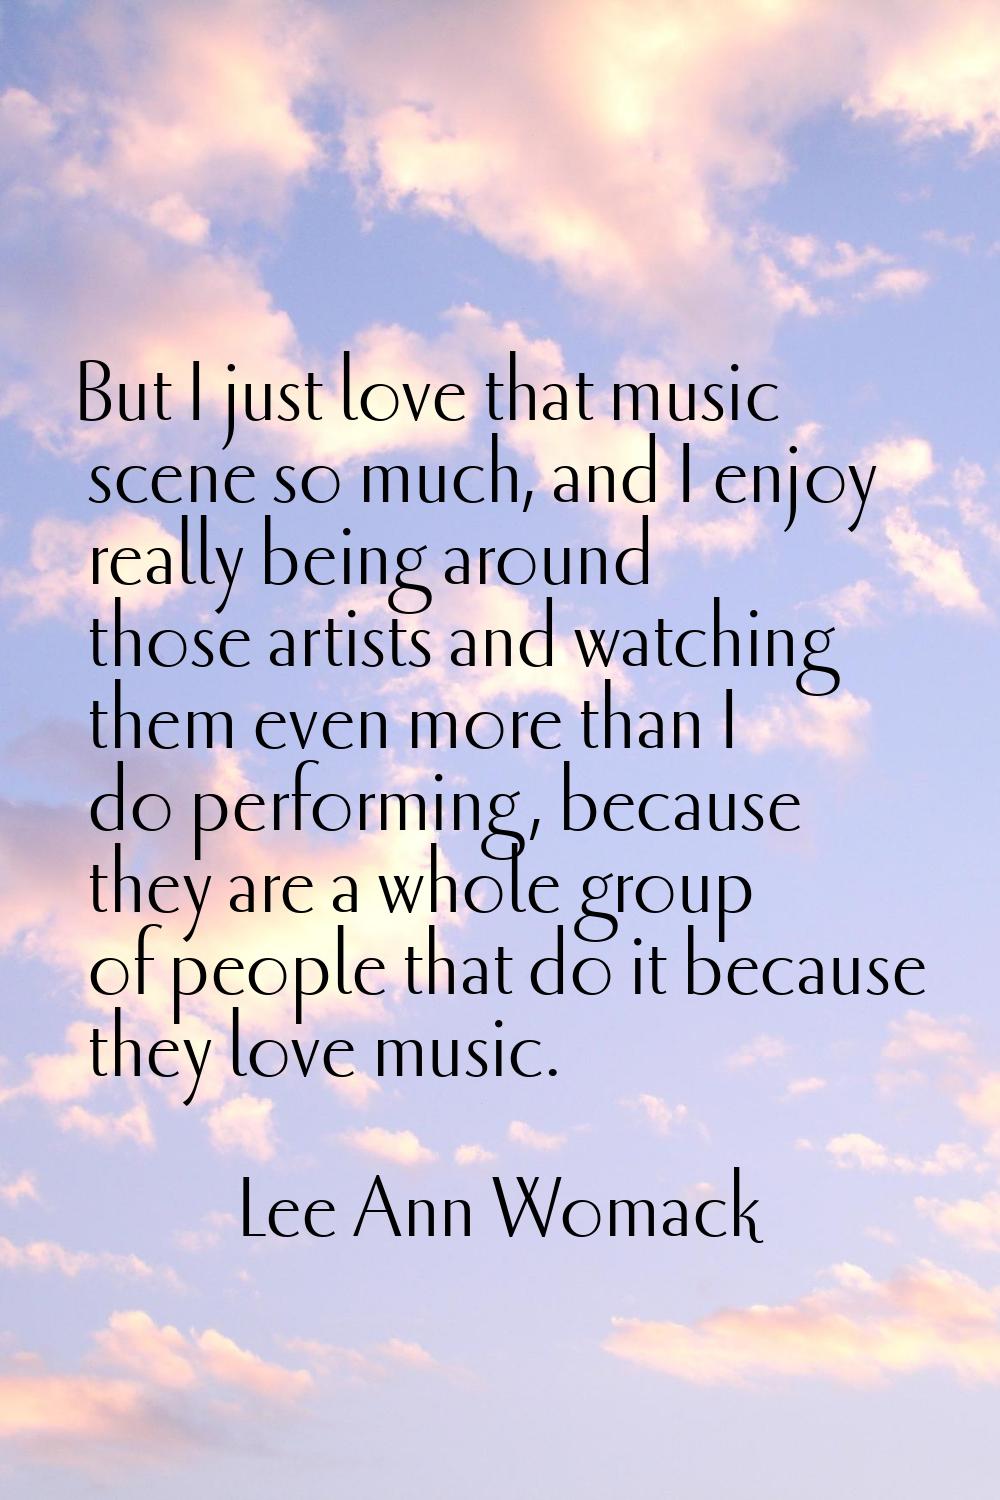 But I just love that music scene so much, and I enjoy really being around those artists and watchin